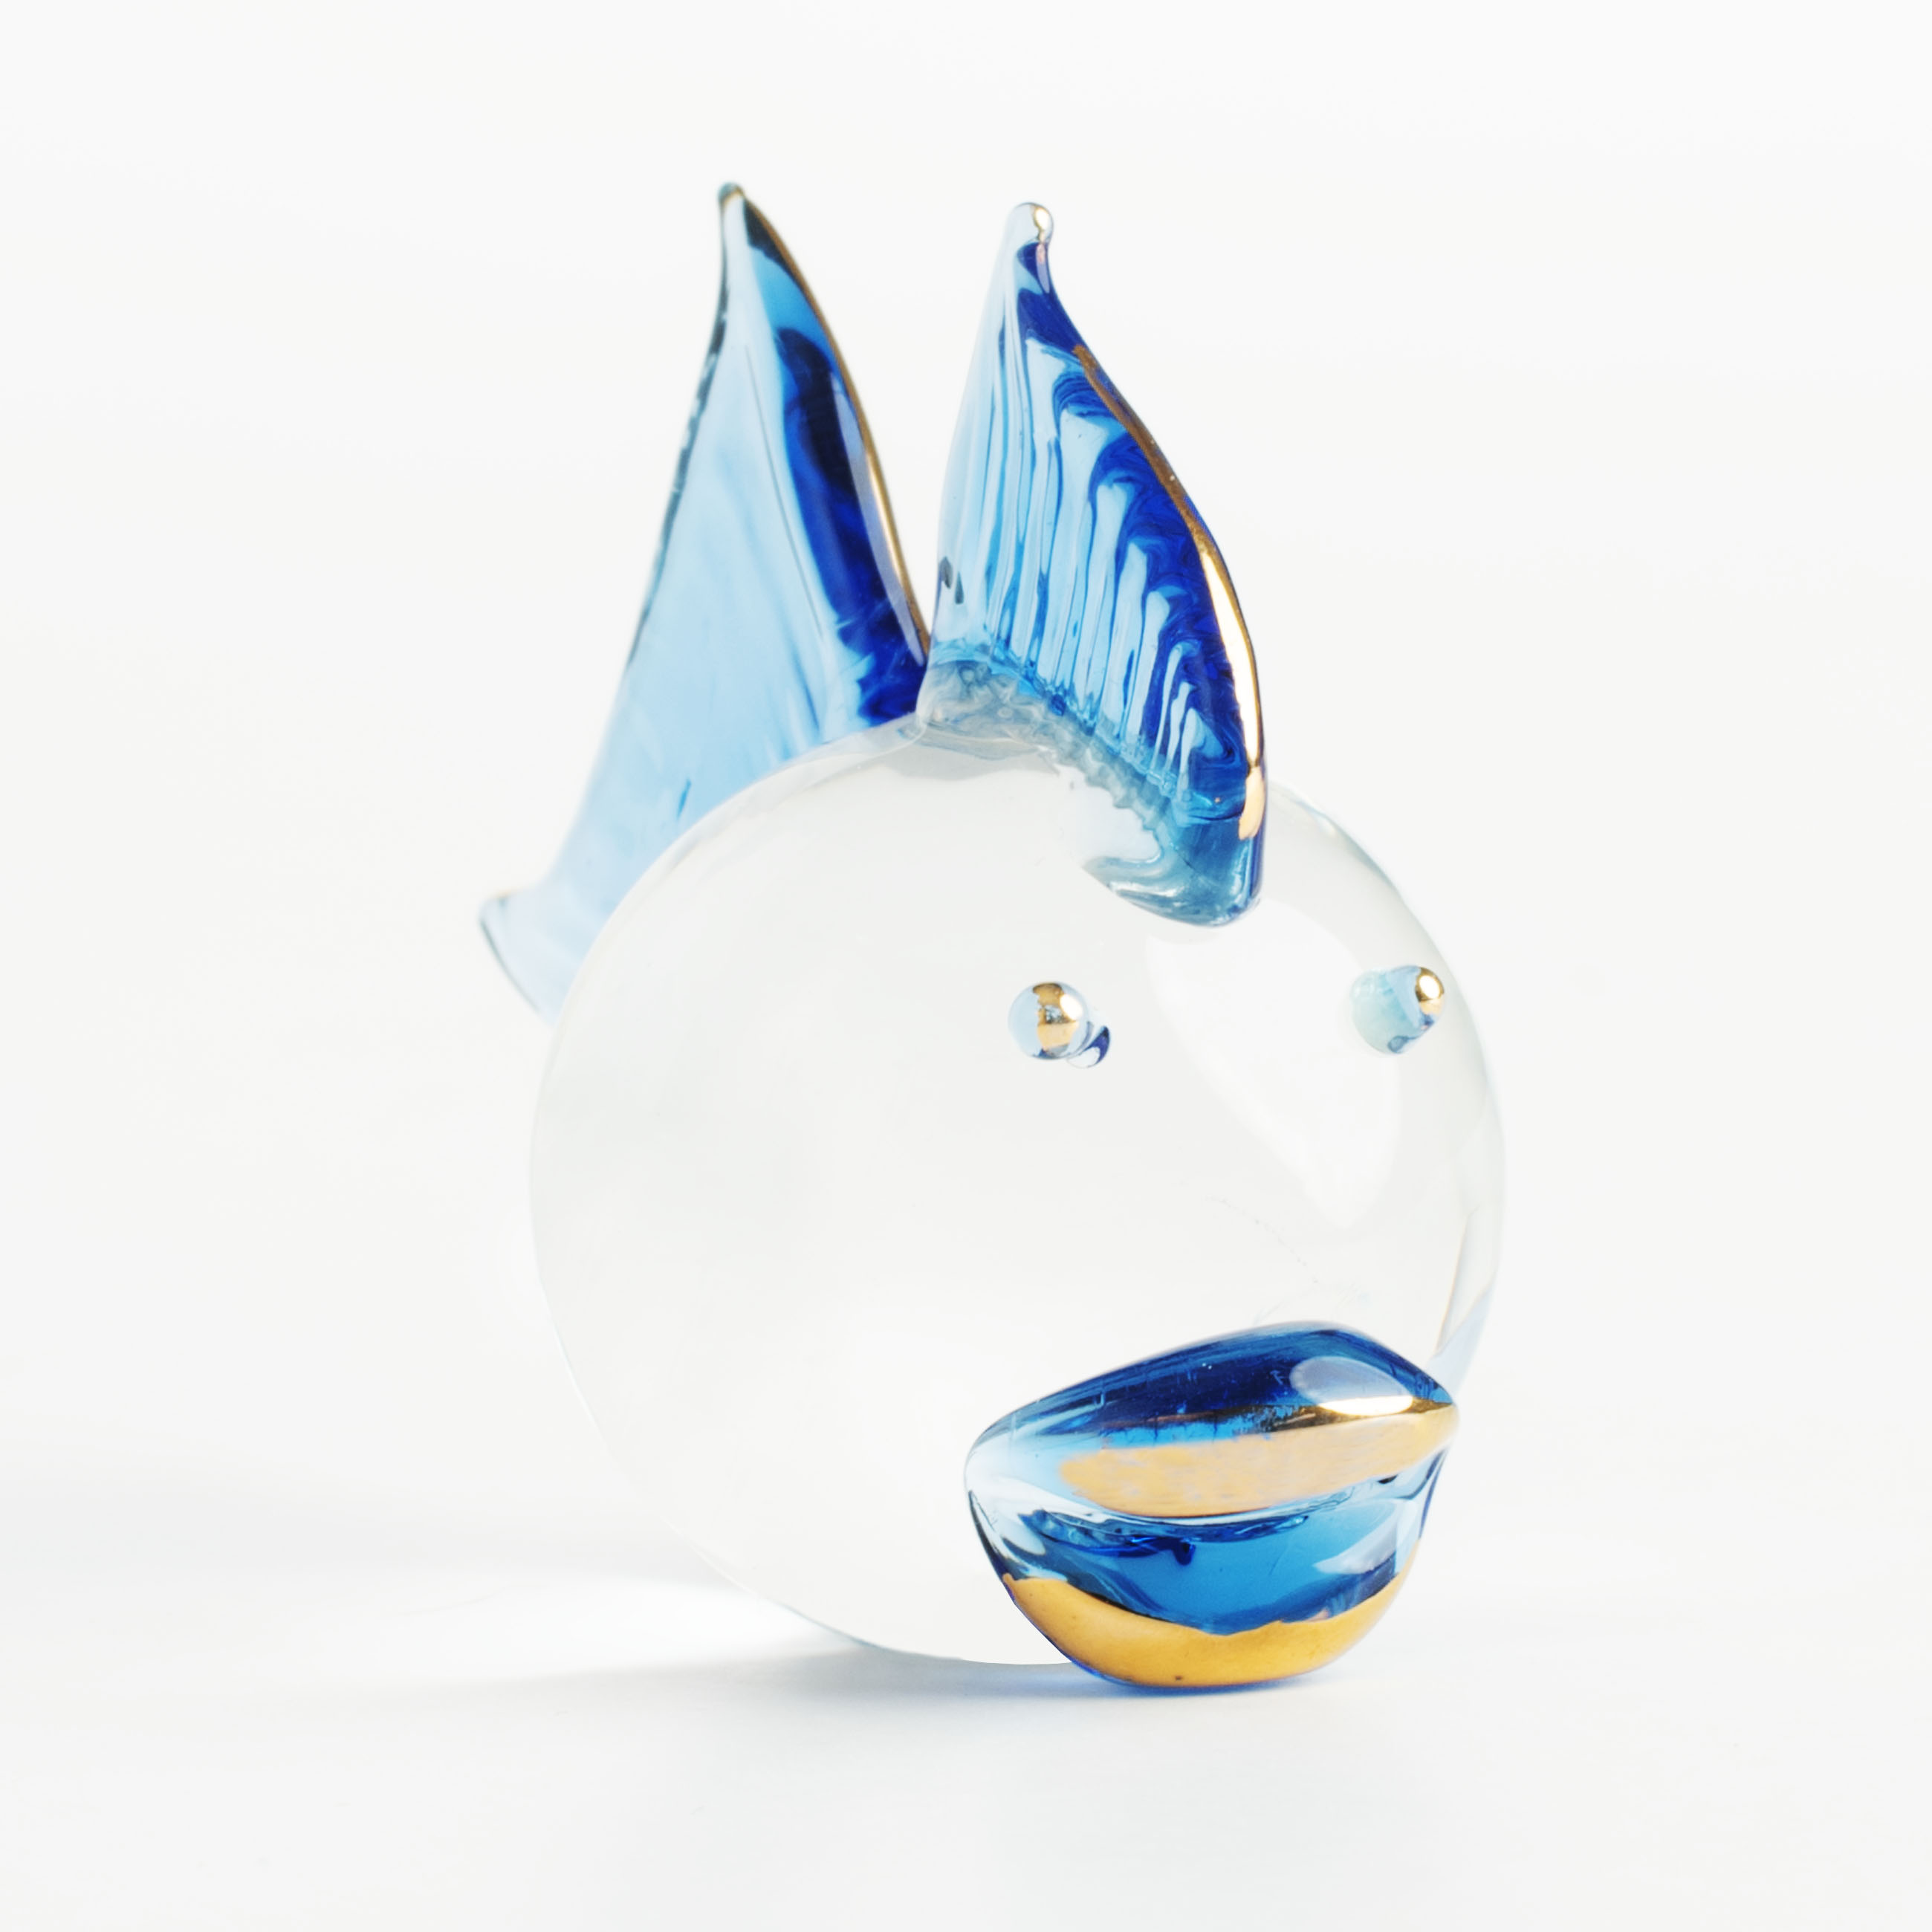 Statuette, 5 cm, glass, Fish with blue fin and tail, Vitreous изображение № 3